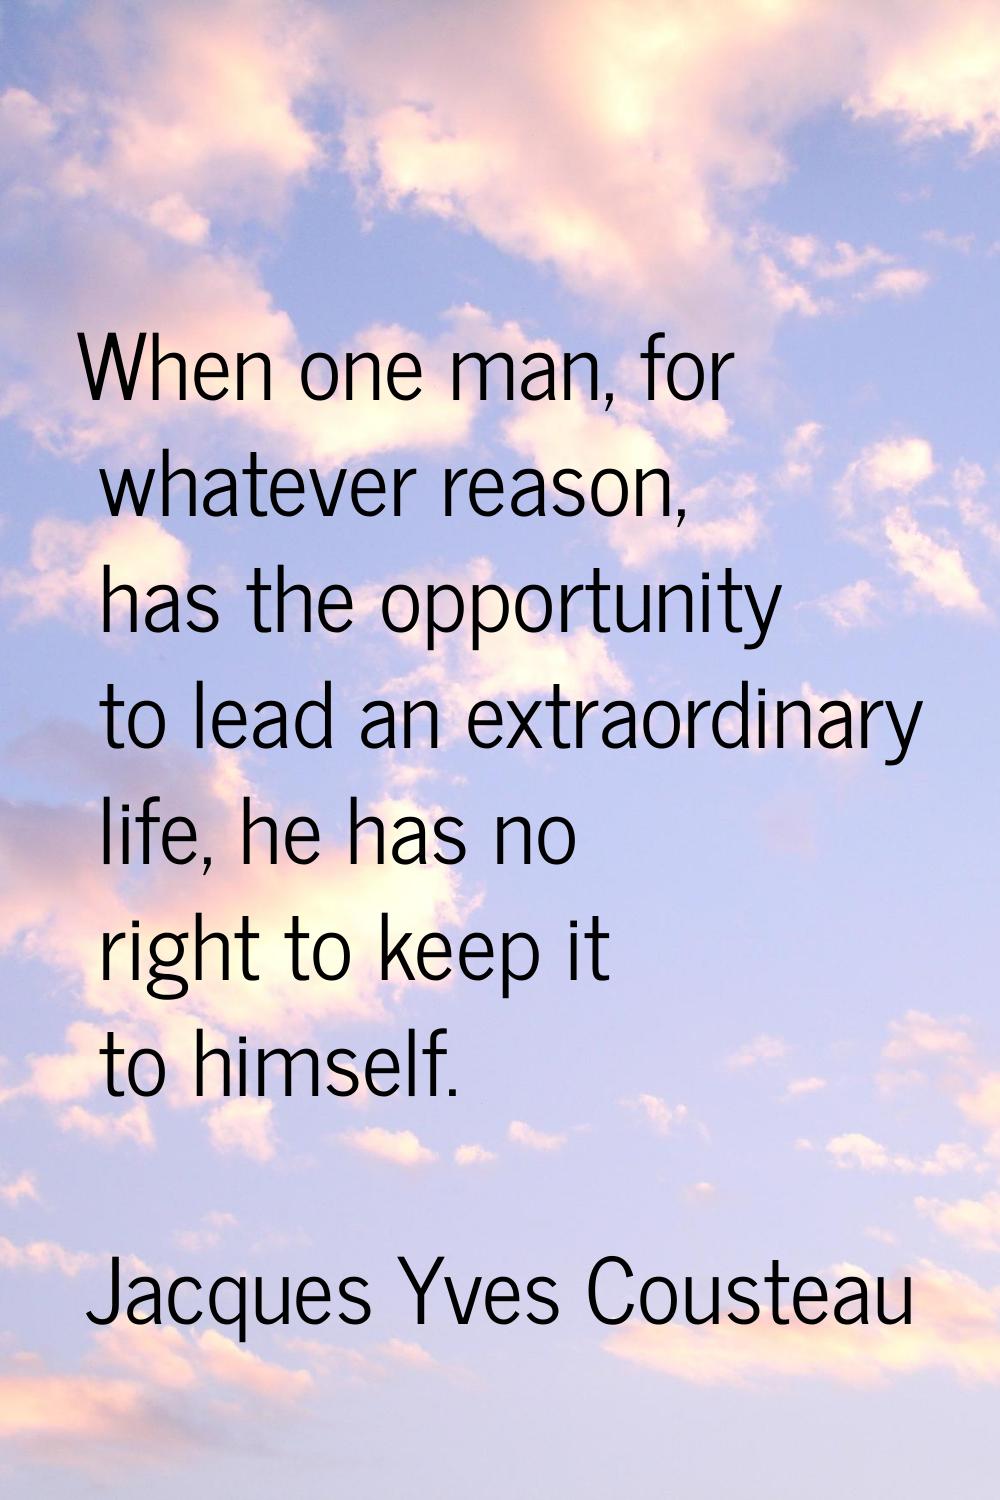 When one man, for whatever reason, has the opportunity to lead an extraordinary life, he has no rig